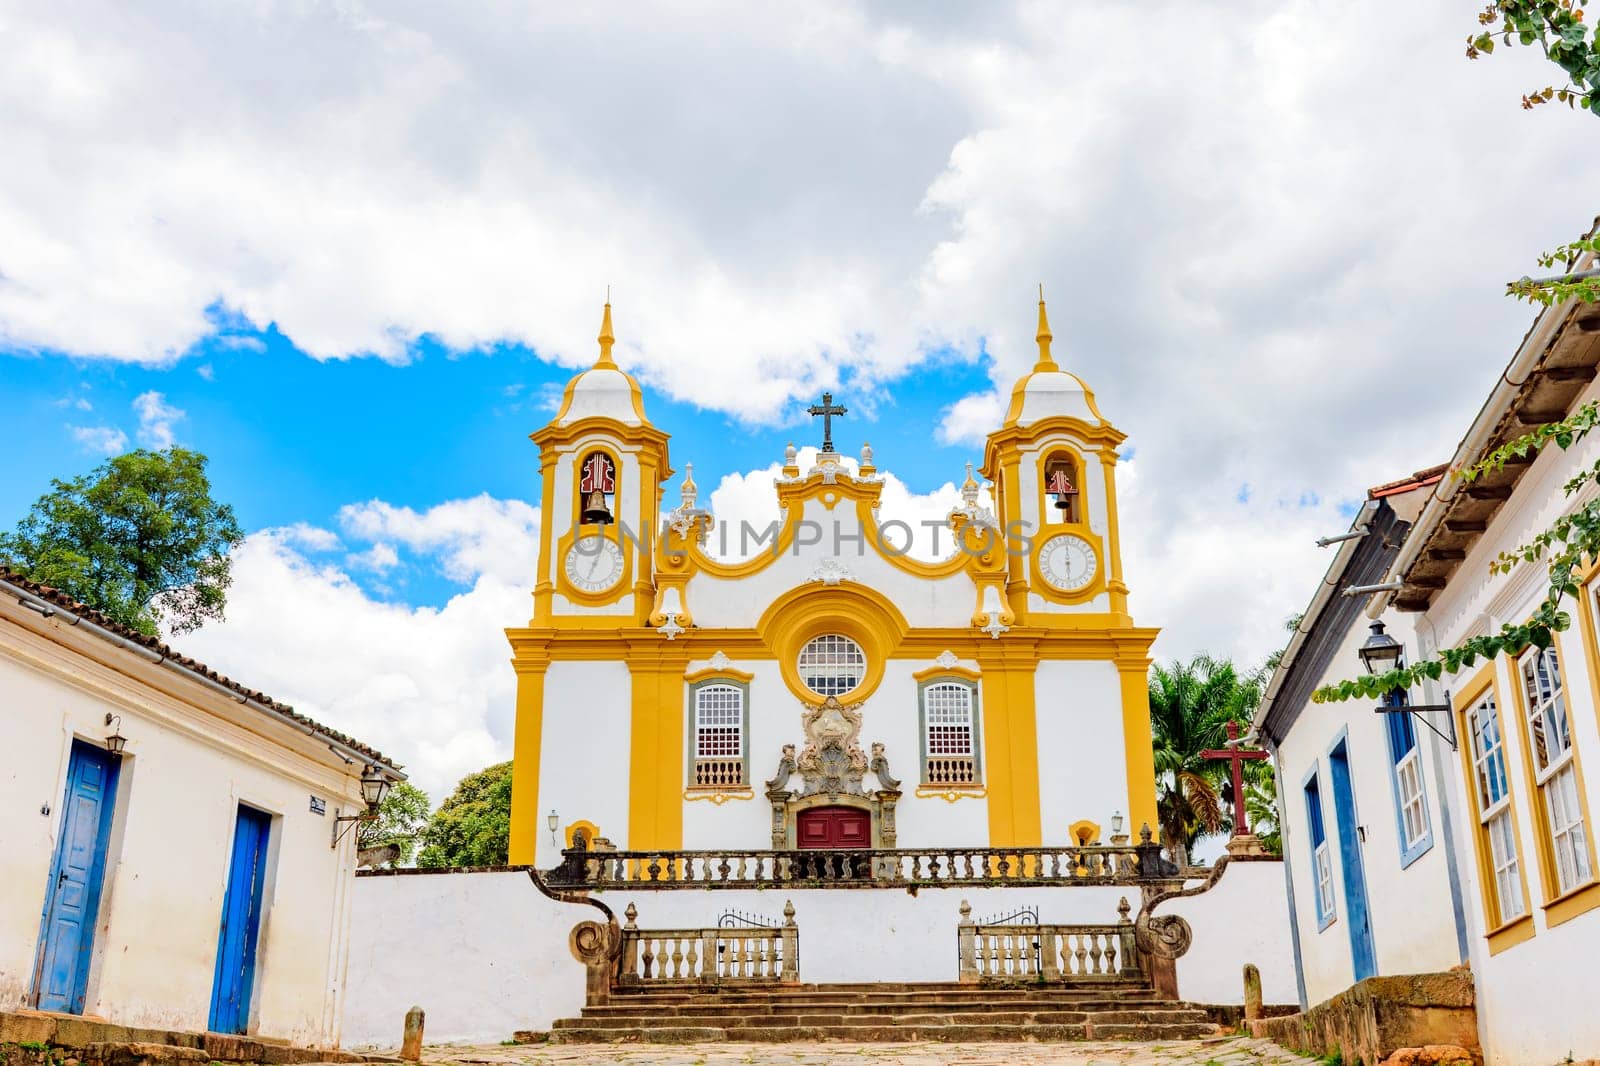 Houses and historic church in an old cobbled street in the famous city of Tiradentes in Minas Gerais